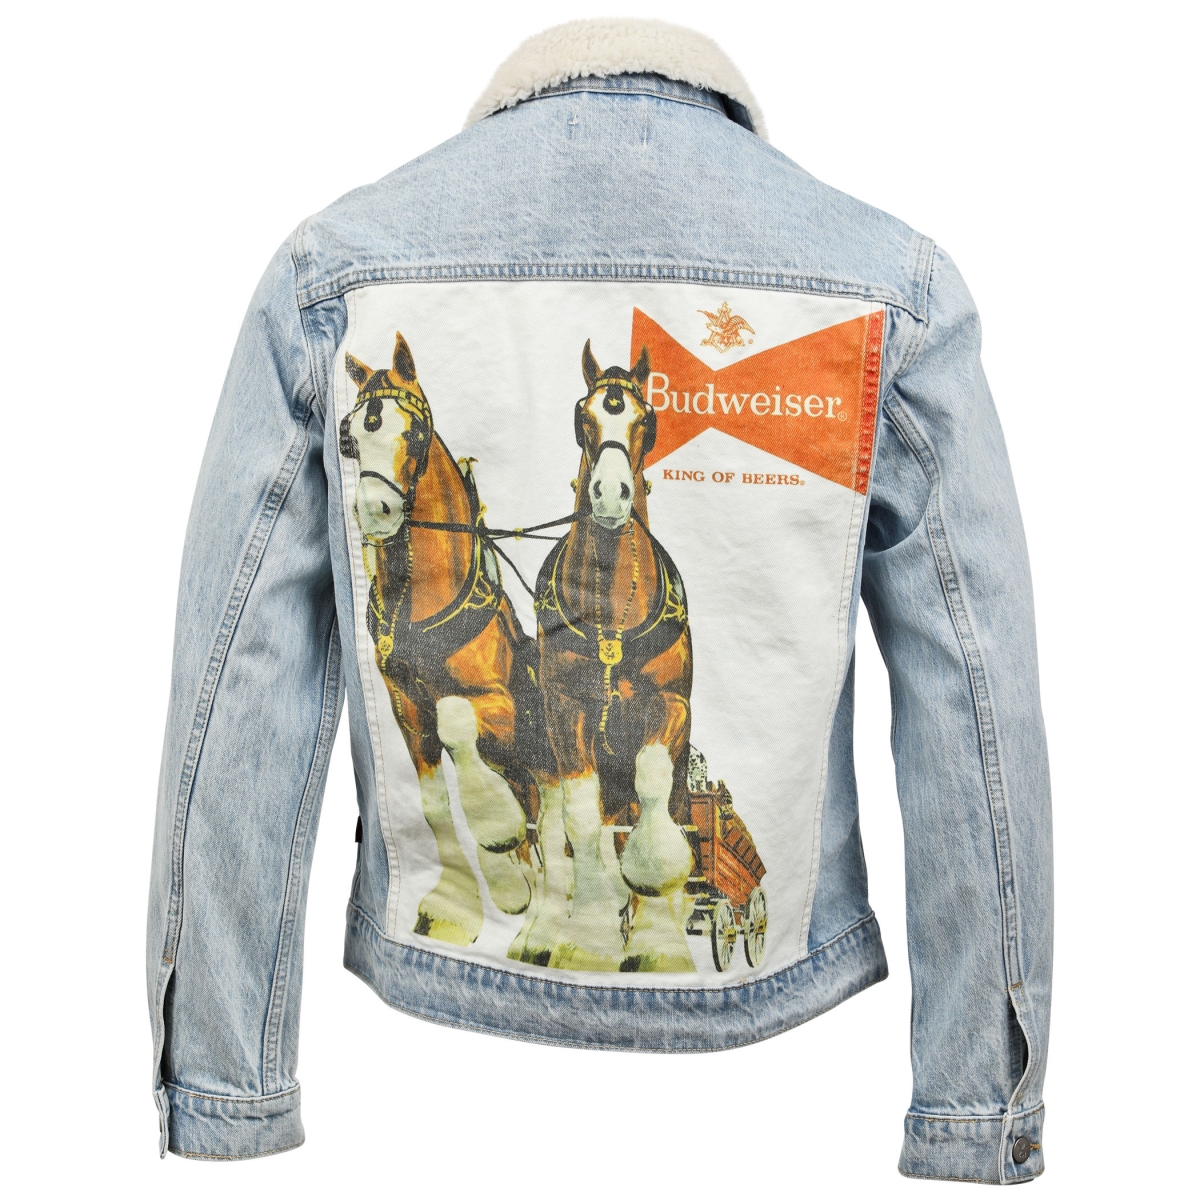 814435-small Anheuser-Busch Sherpa Trucker Jacket with Clydesdale Print, Small -  Budweiser